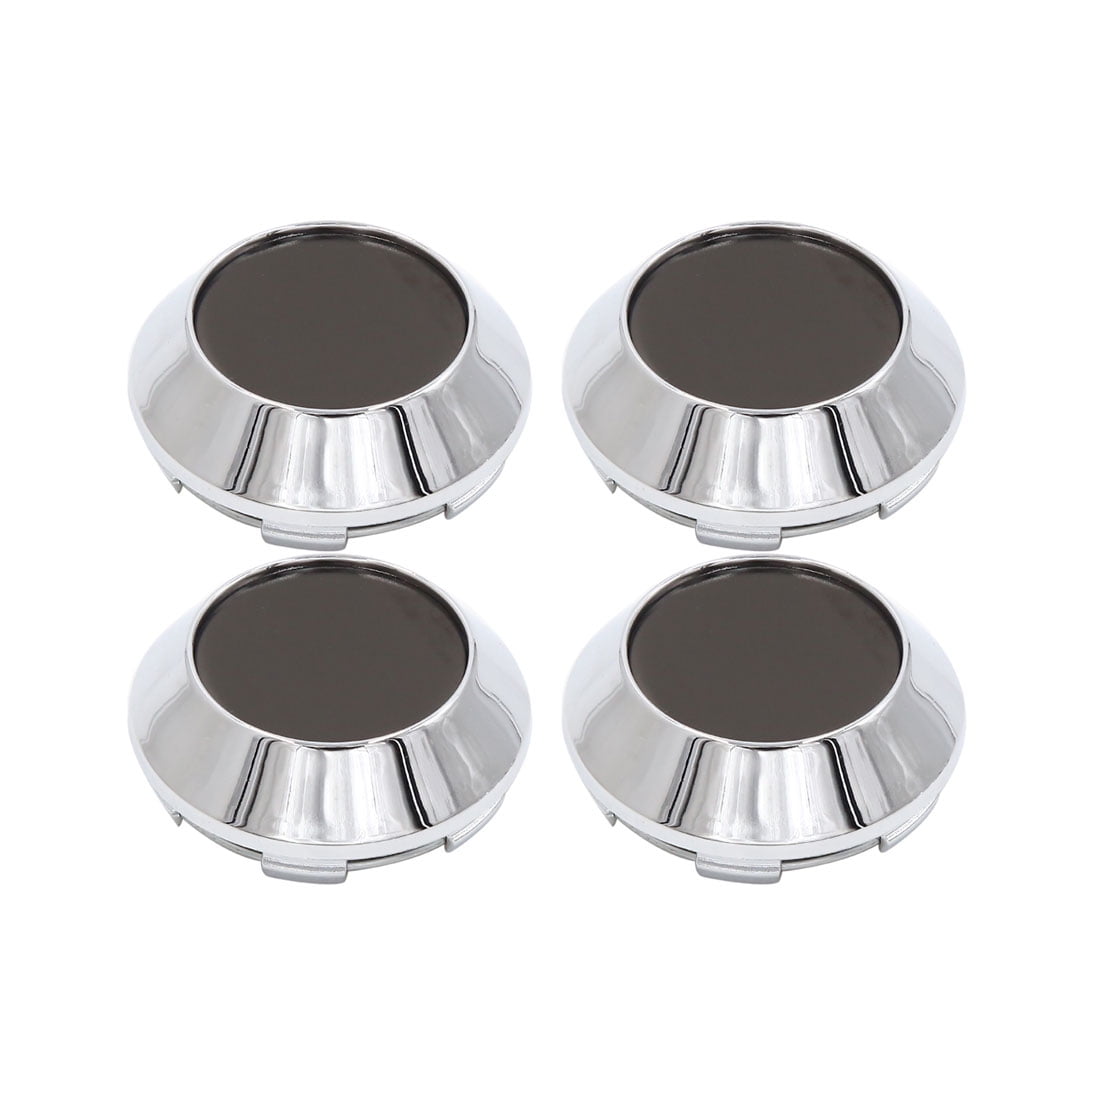 NEW 4PCS Chrome Center Wheel Hub Caps Emblems Cover Fit for Ford Vehicles 67mm 